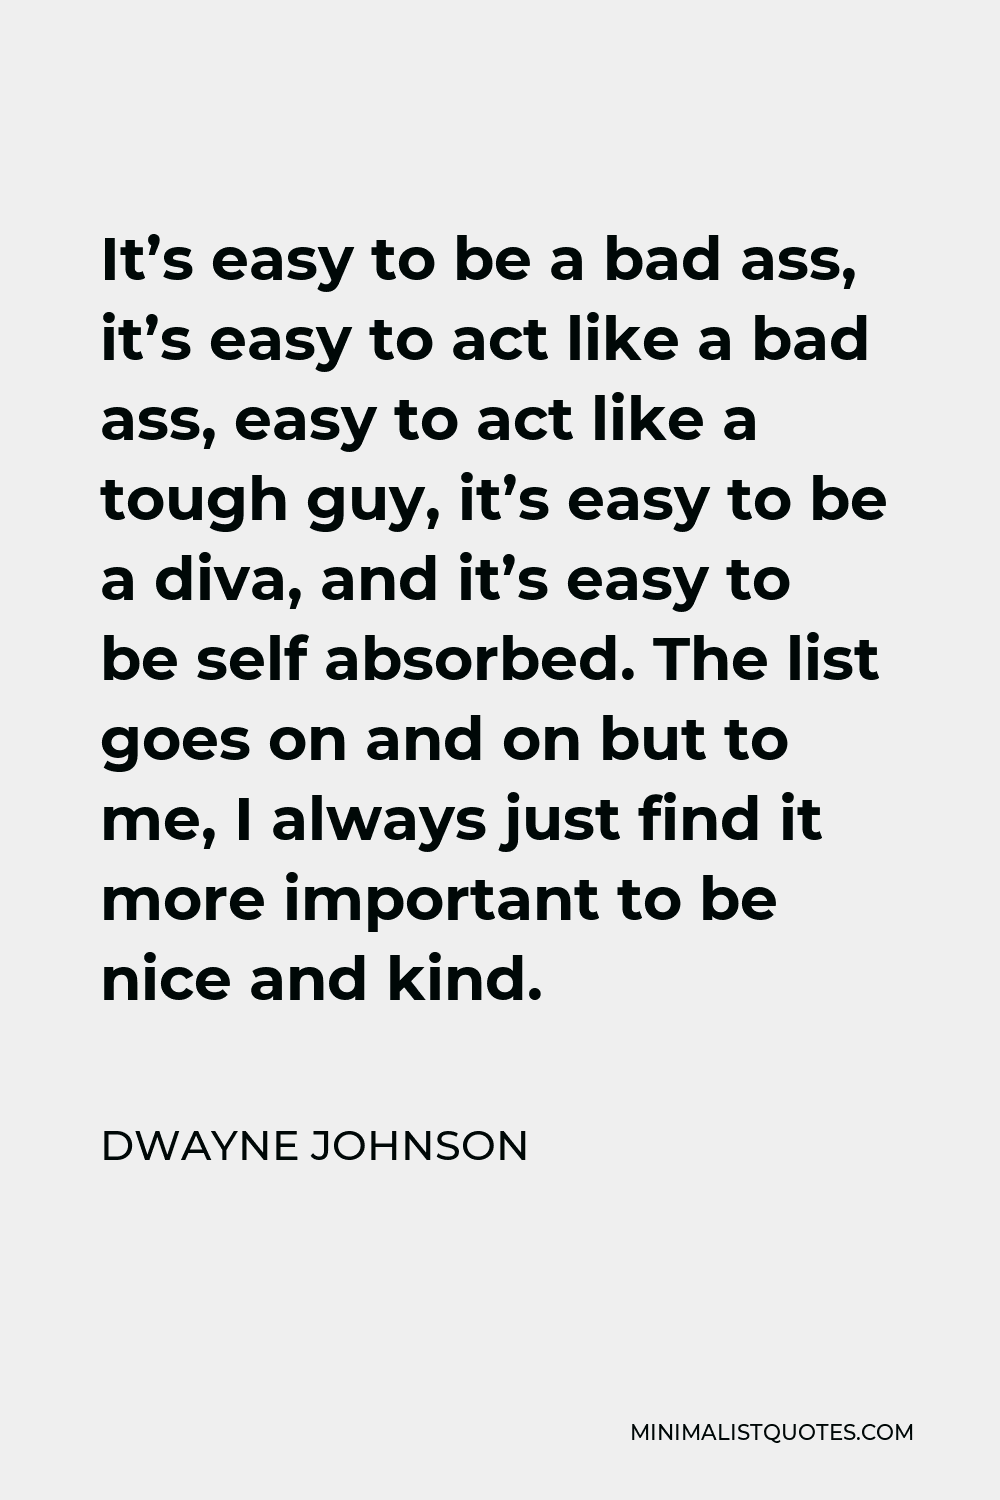 Dwayne Johnson Quote - It’s easy to be a bad ass, it’s easy to act like a bad ass, easy to act like a tough guy, it’s easy to be a diva, and it’s easy to be self absorbed. The list goes on and on but to me, I always just find it more important to be nice and kind.